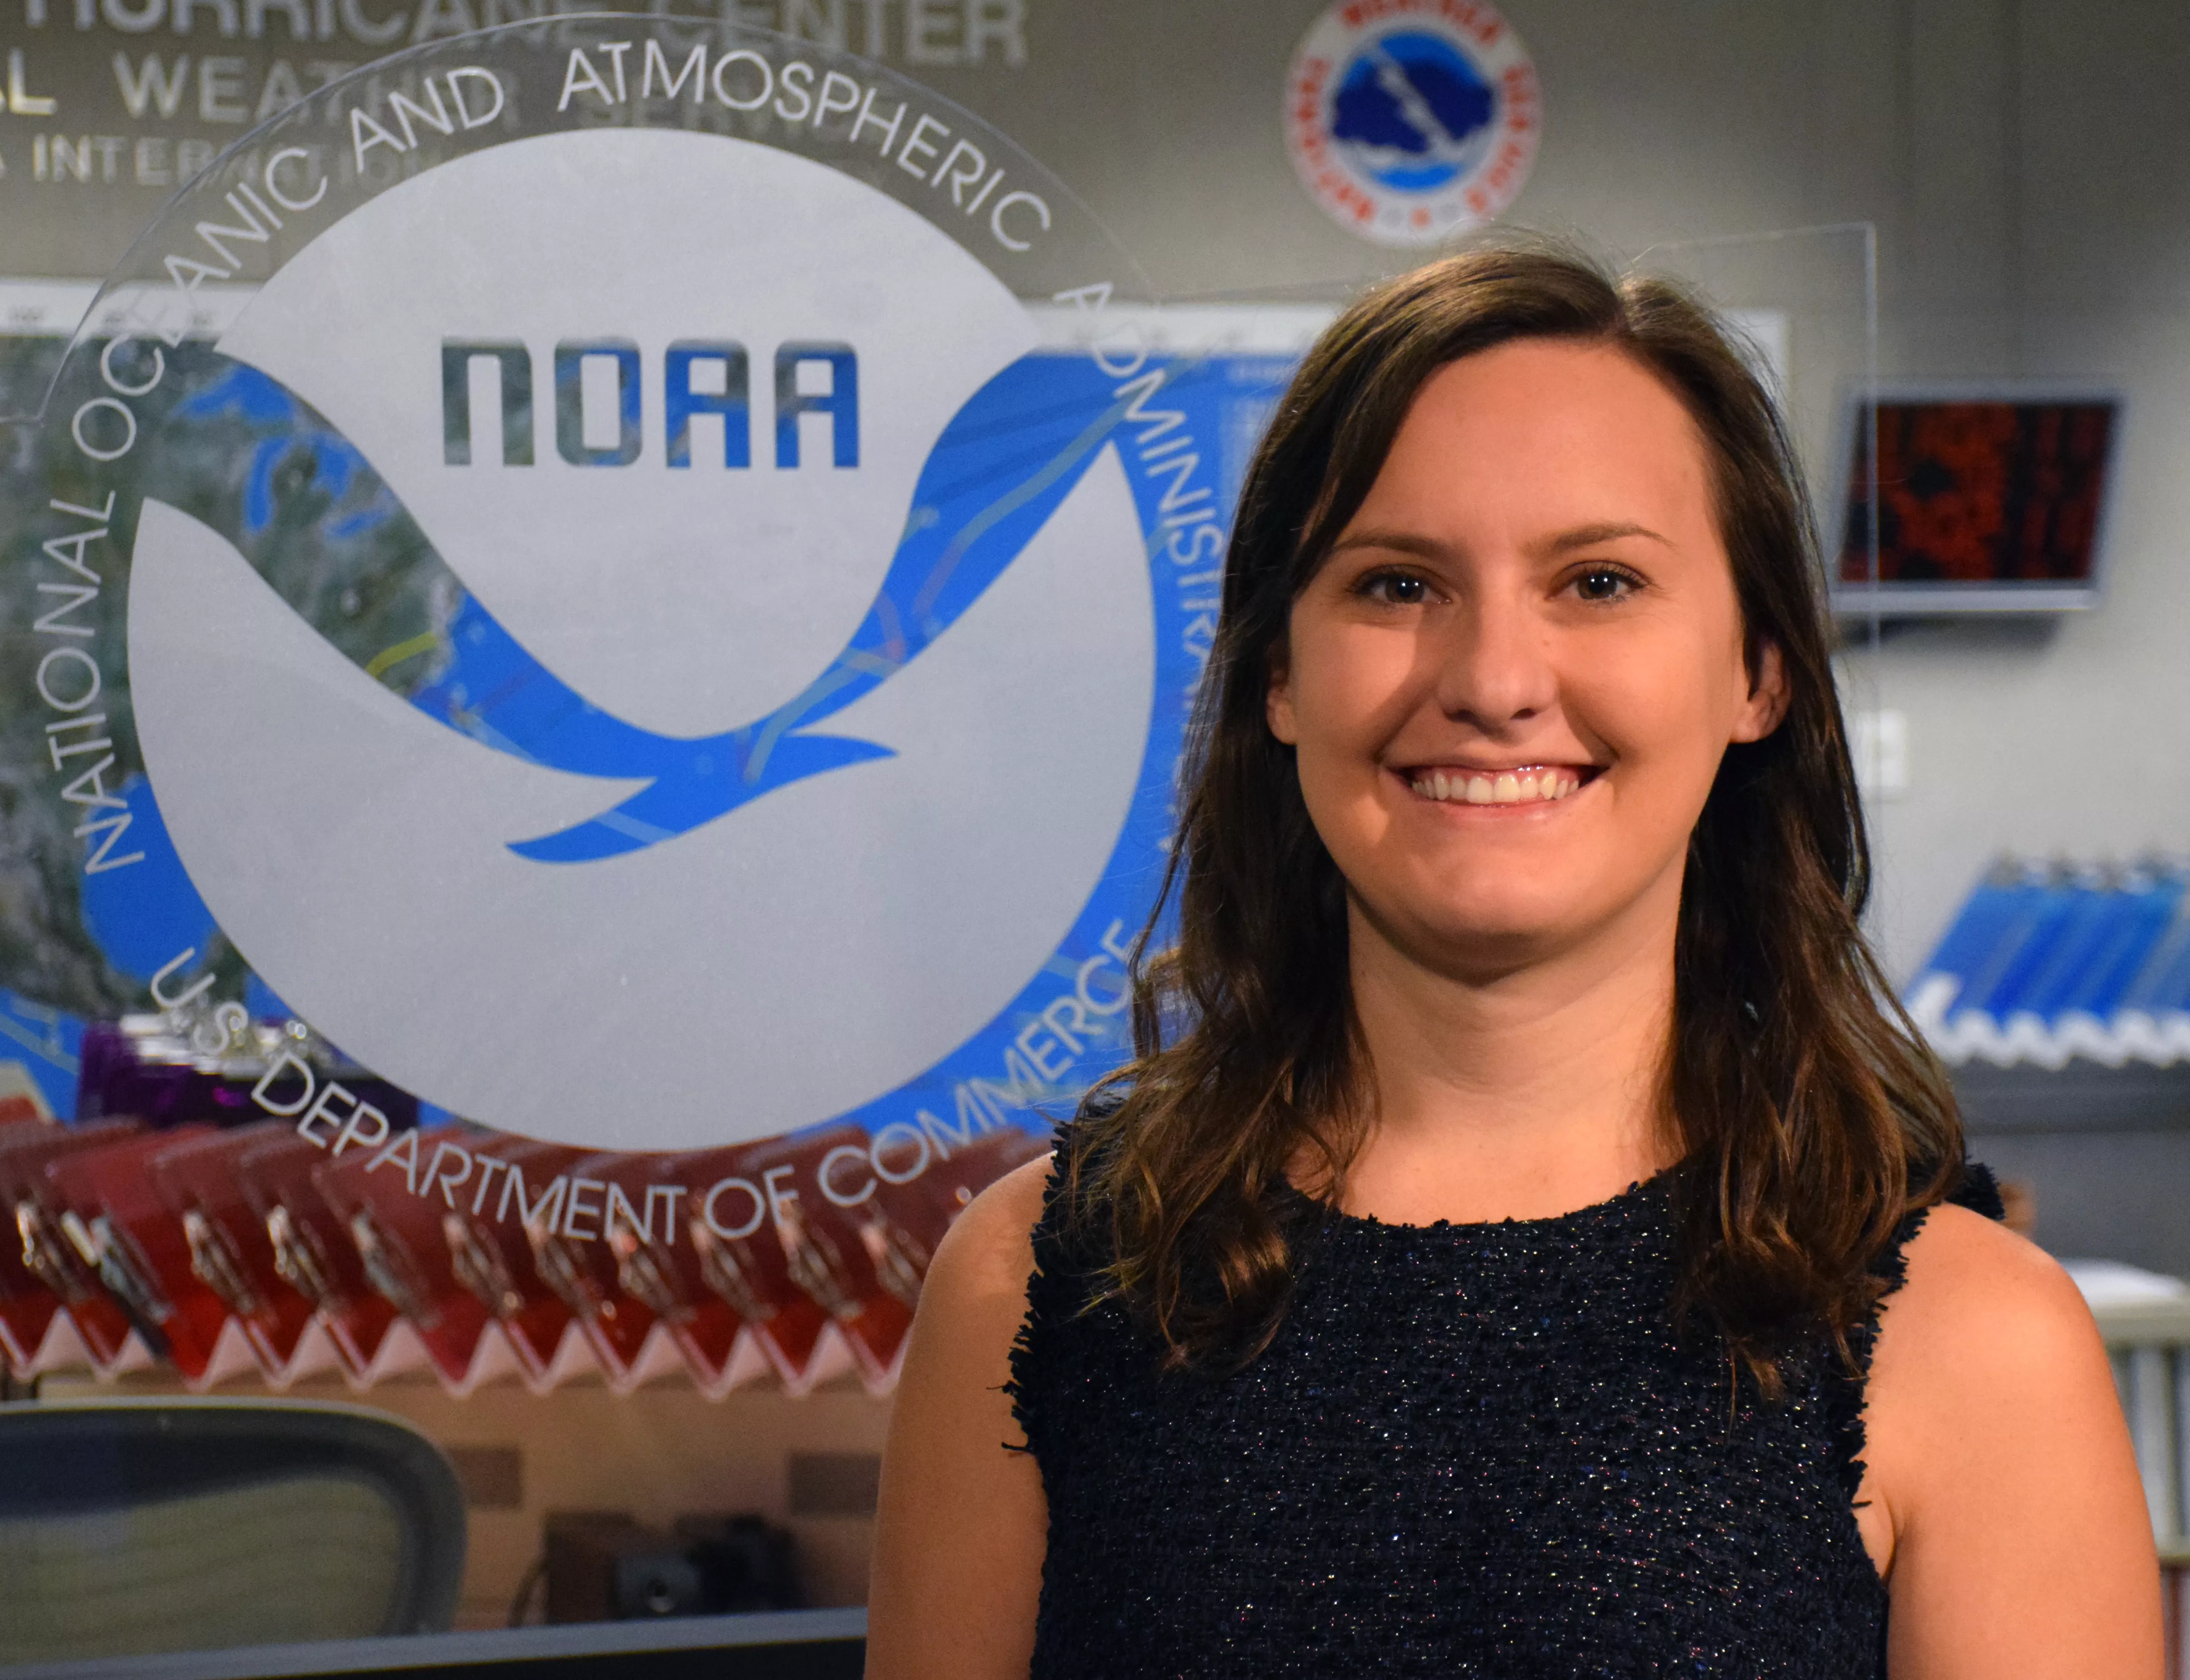 Headshot of Dr. Stephanie Stevenson, taken in front of a window with the NOAA logo to her left